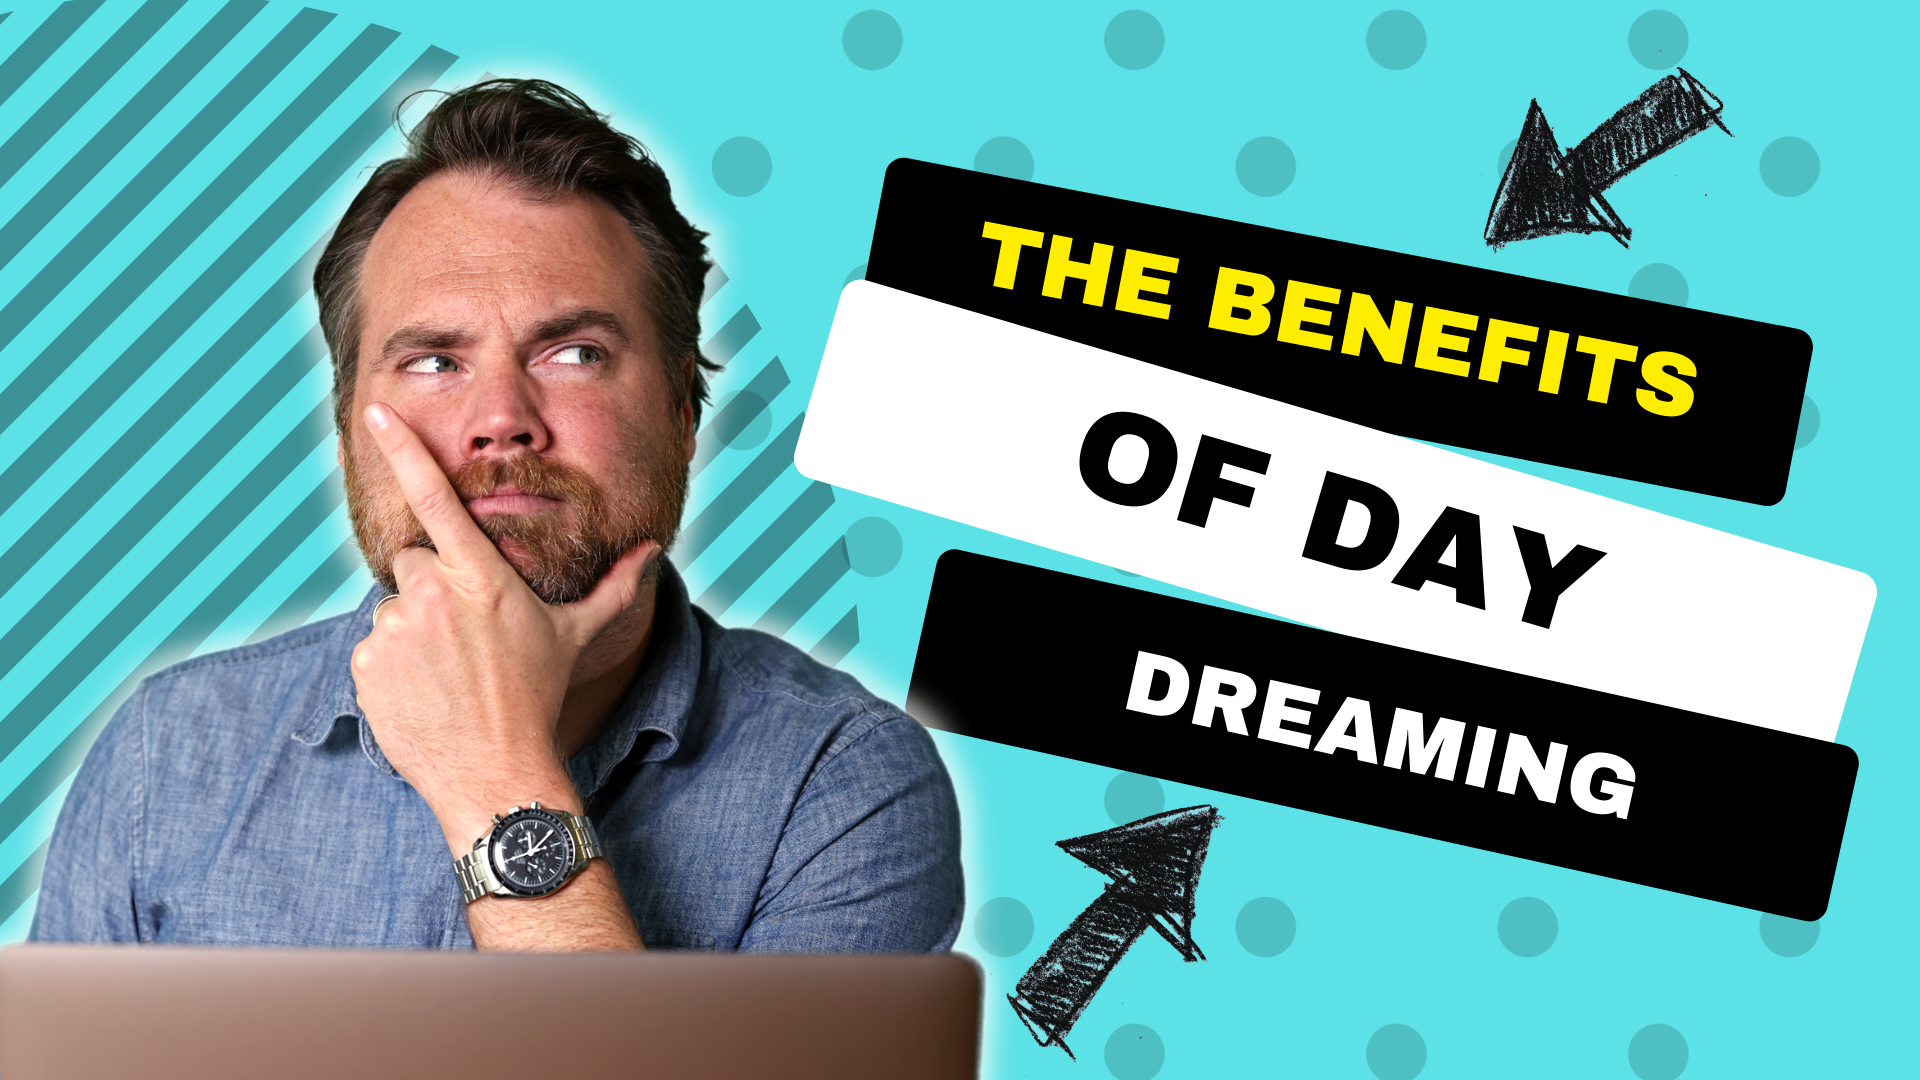 The Benefits of Day Dreaming